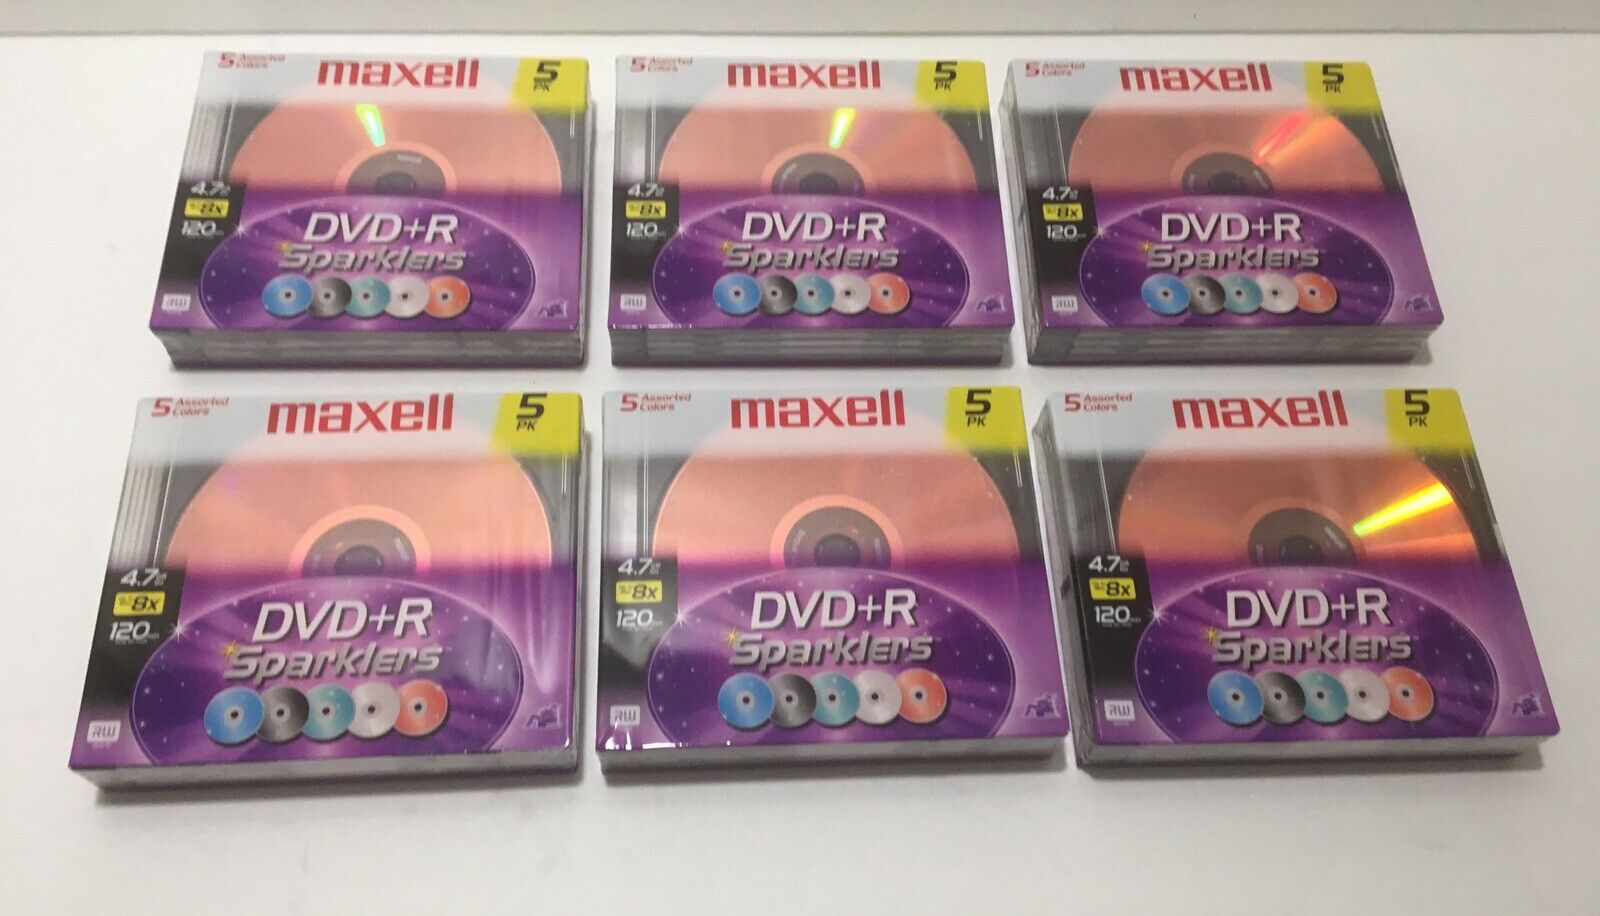 Maxell DVD+R Sparklers 5pk - (lot of 6) (RW, 4.7gb, up to 8x, 120 minutes) NEW